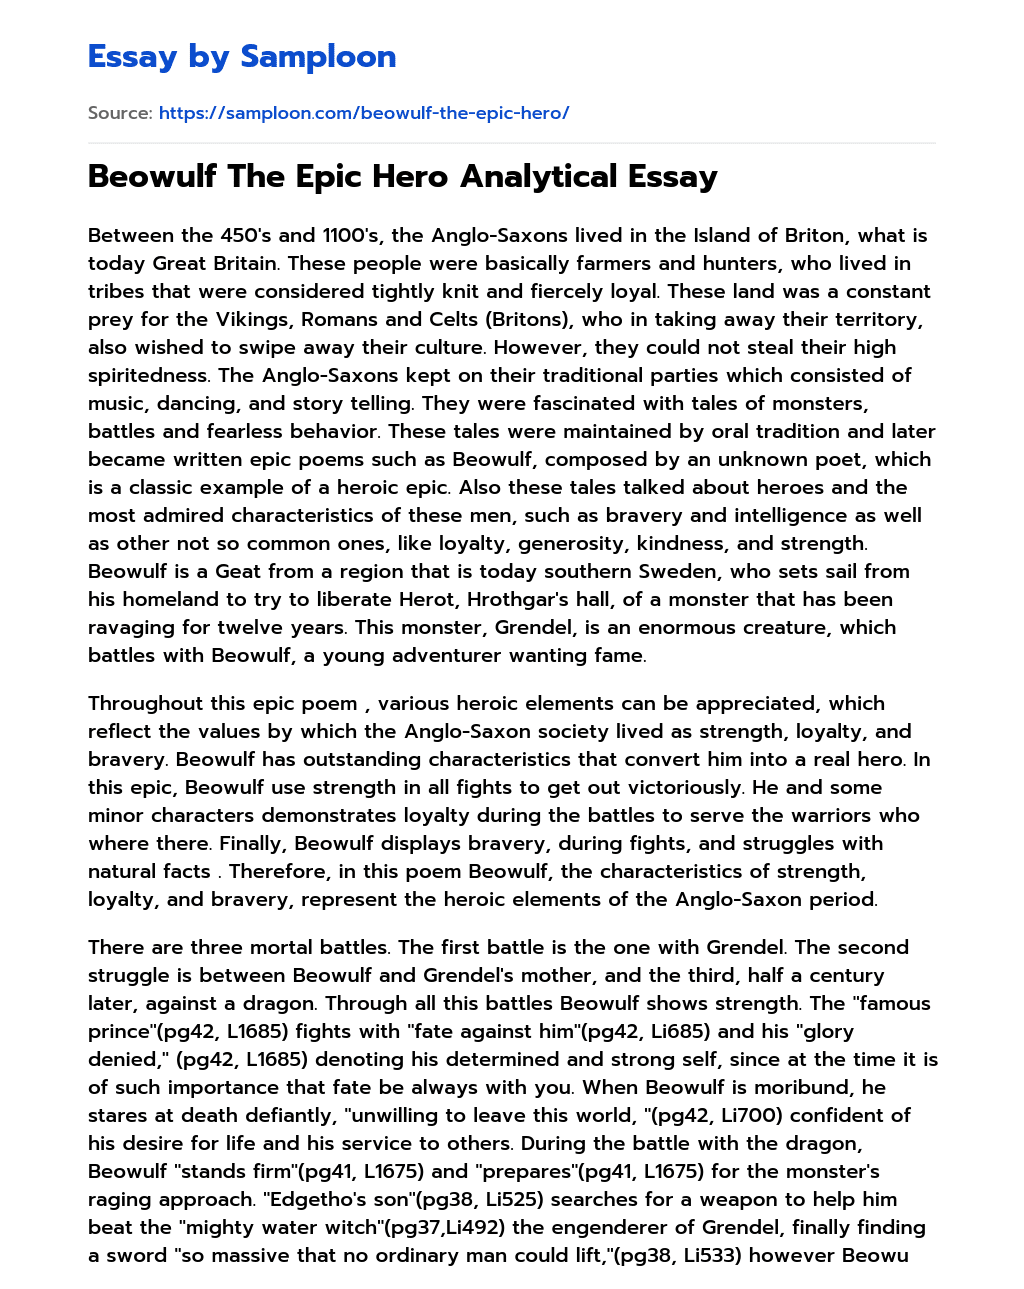 Beowulf The Epic Hero Analytical Essay essay